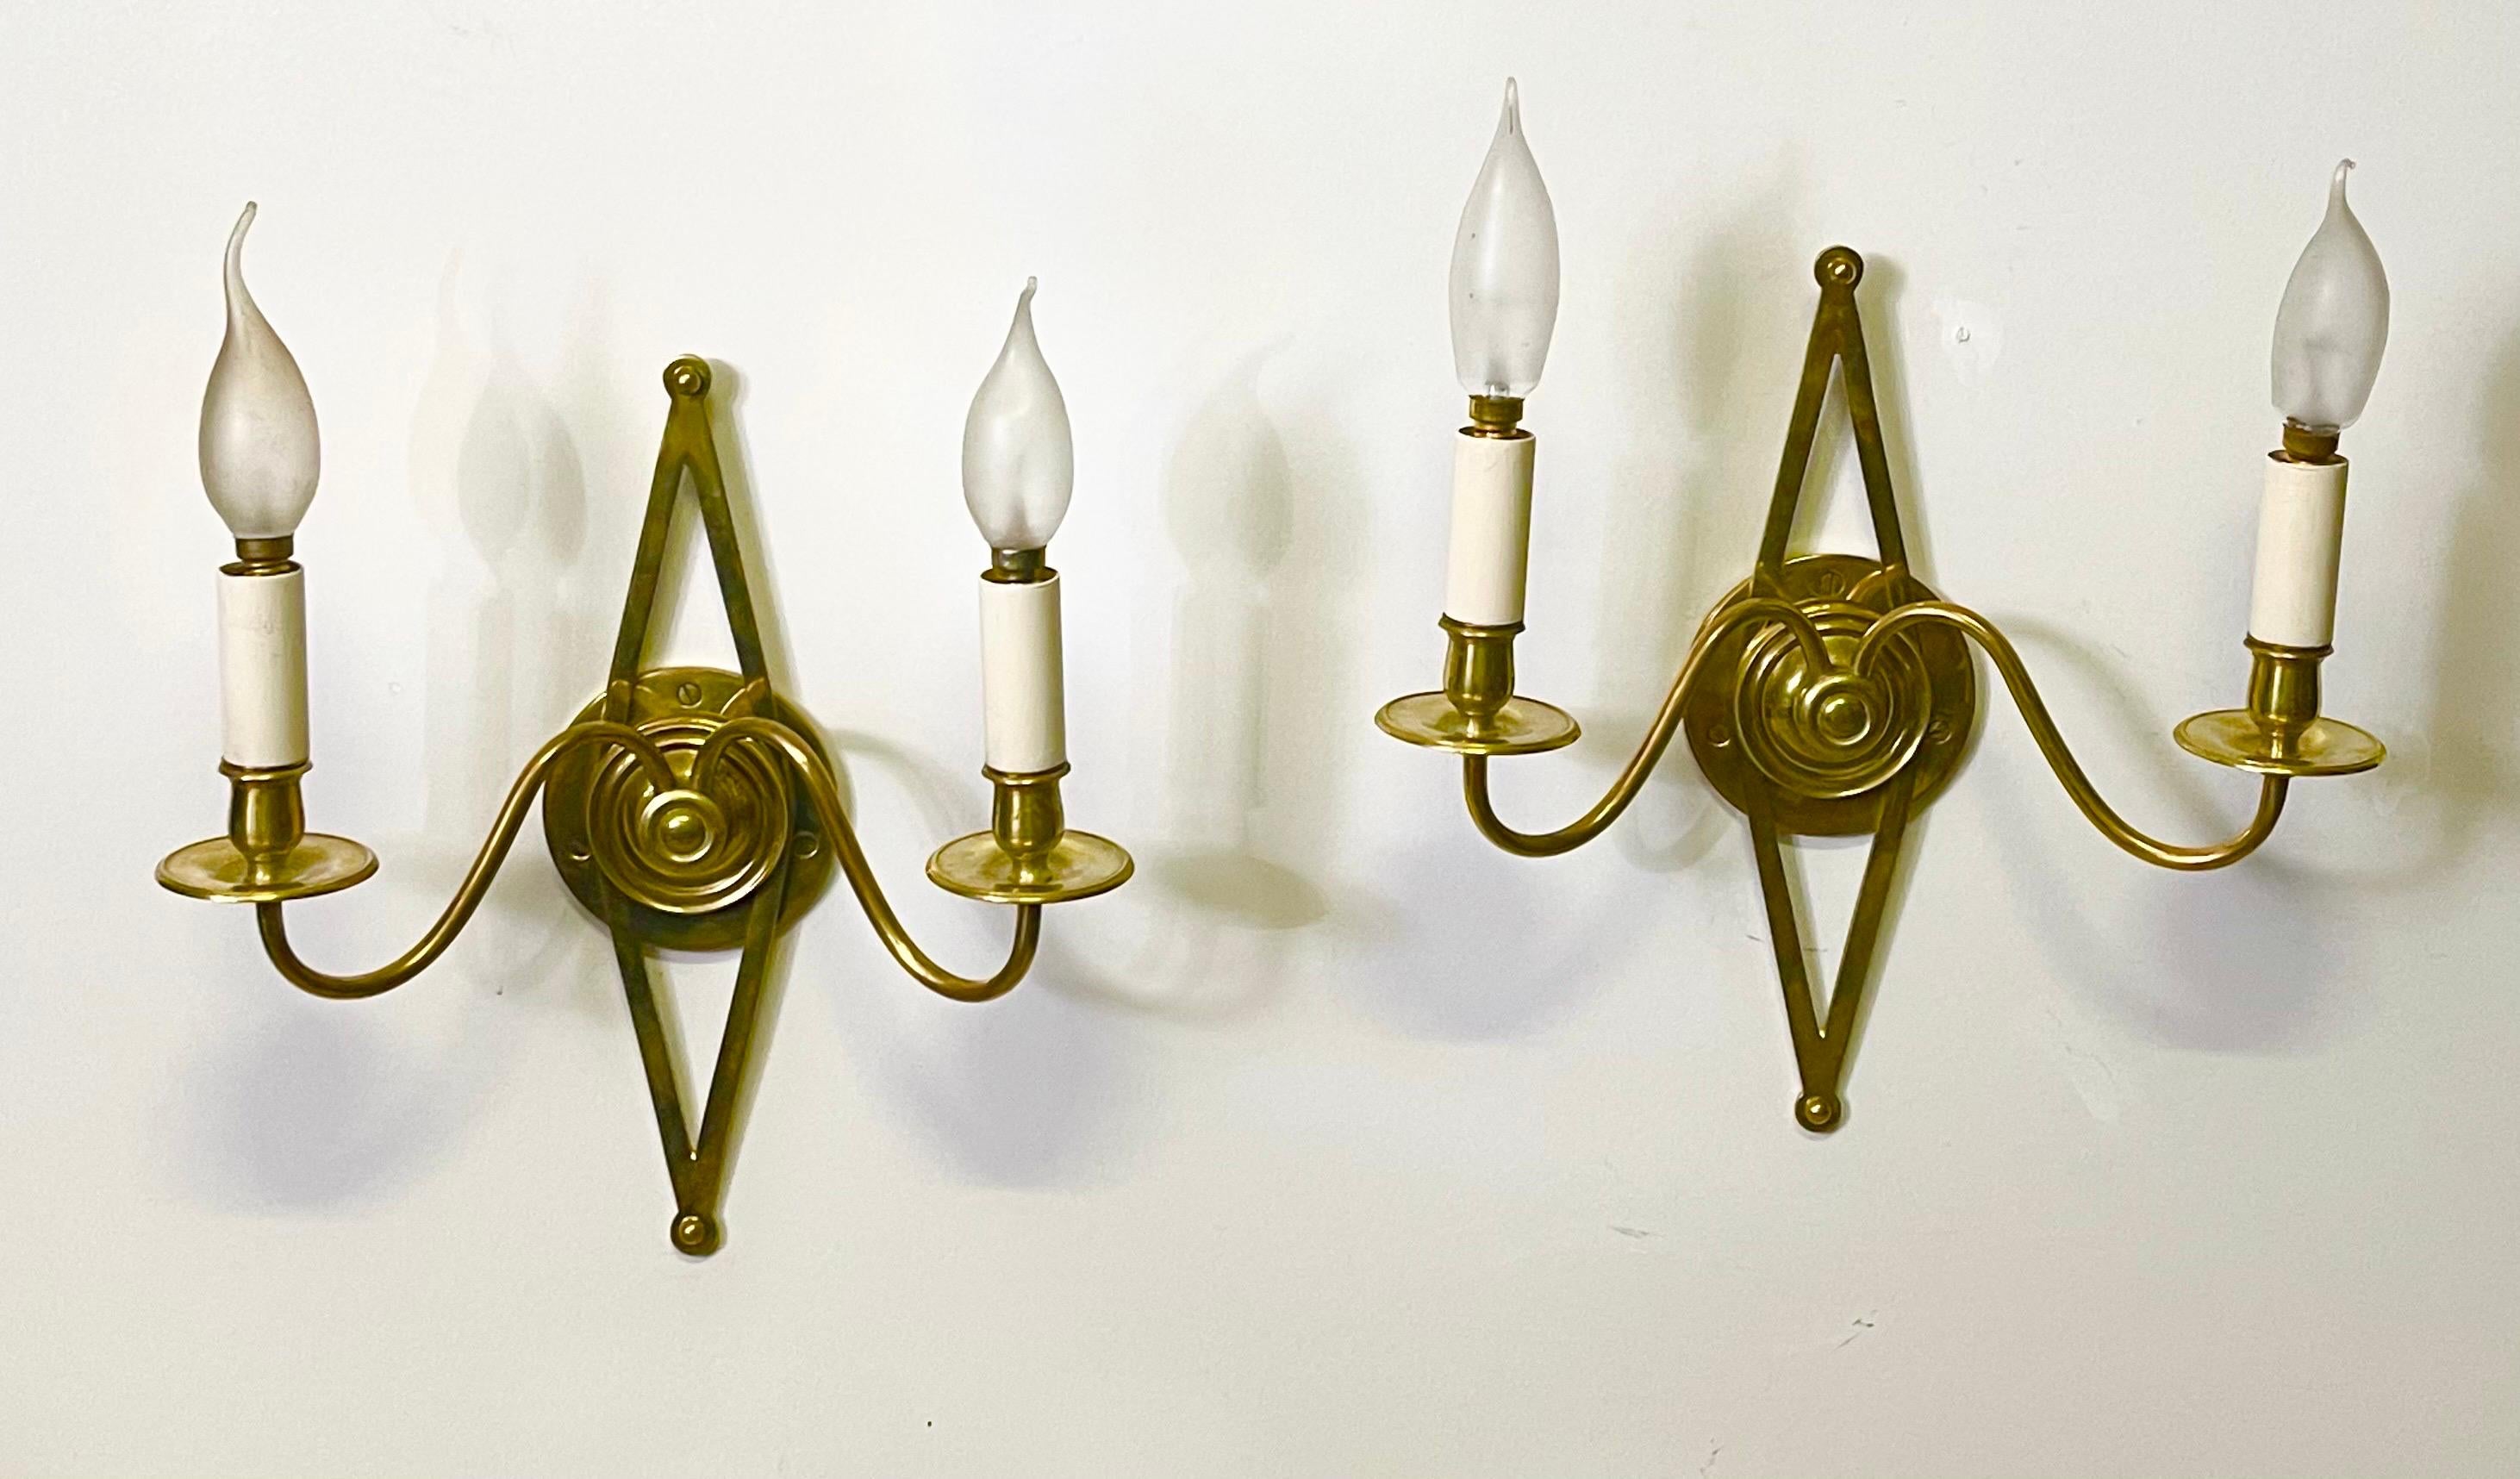 French Rare Pair of Polished Brass Wall Sconces by Maison Baguès, Paris, circa 1950s For Sale